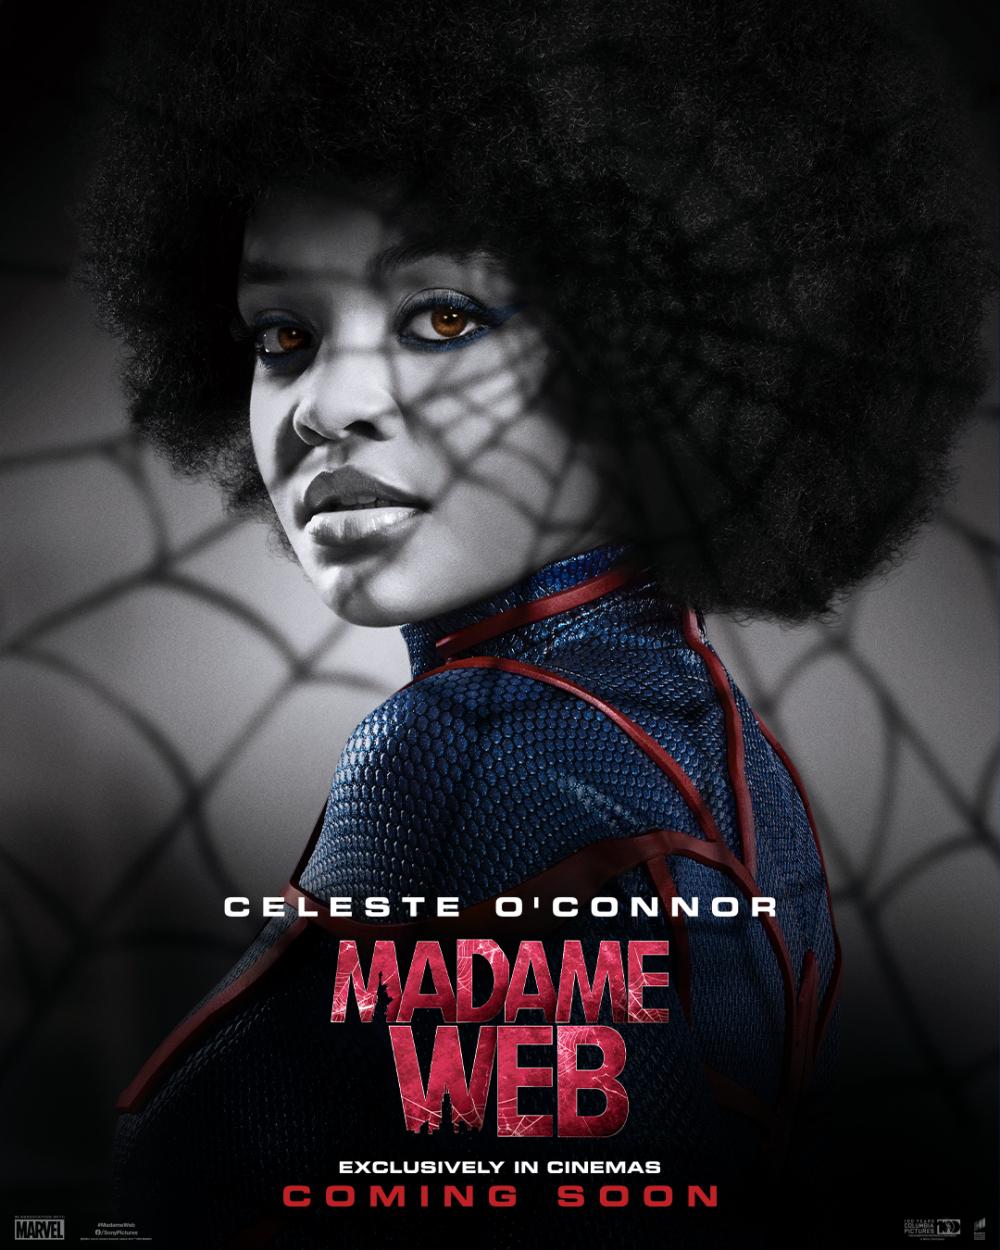 US Character Poster #2